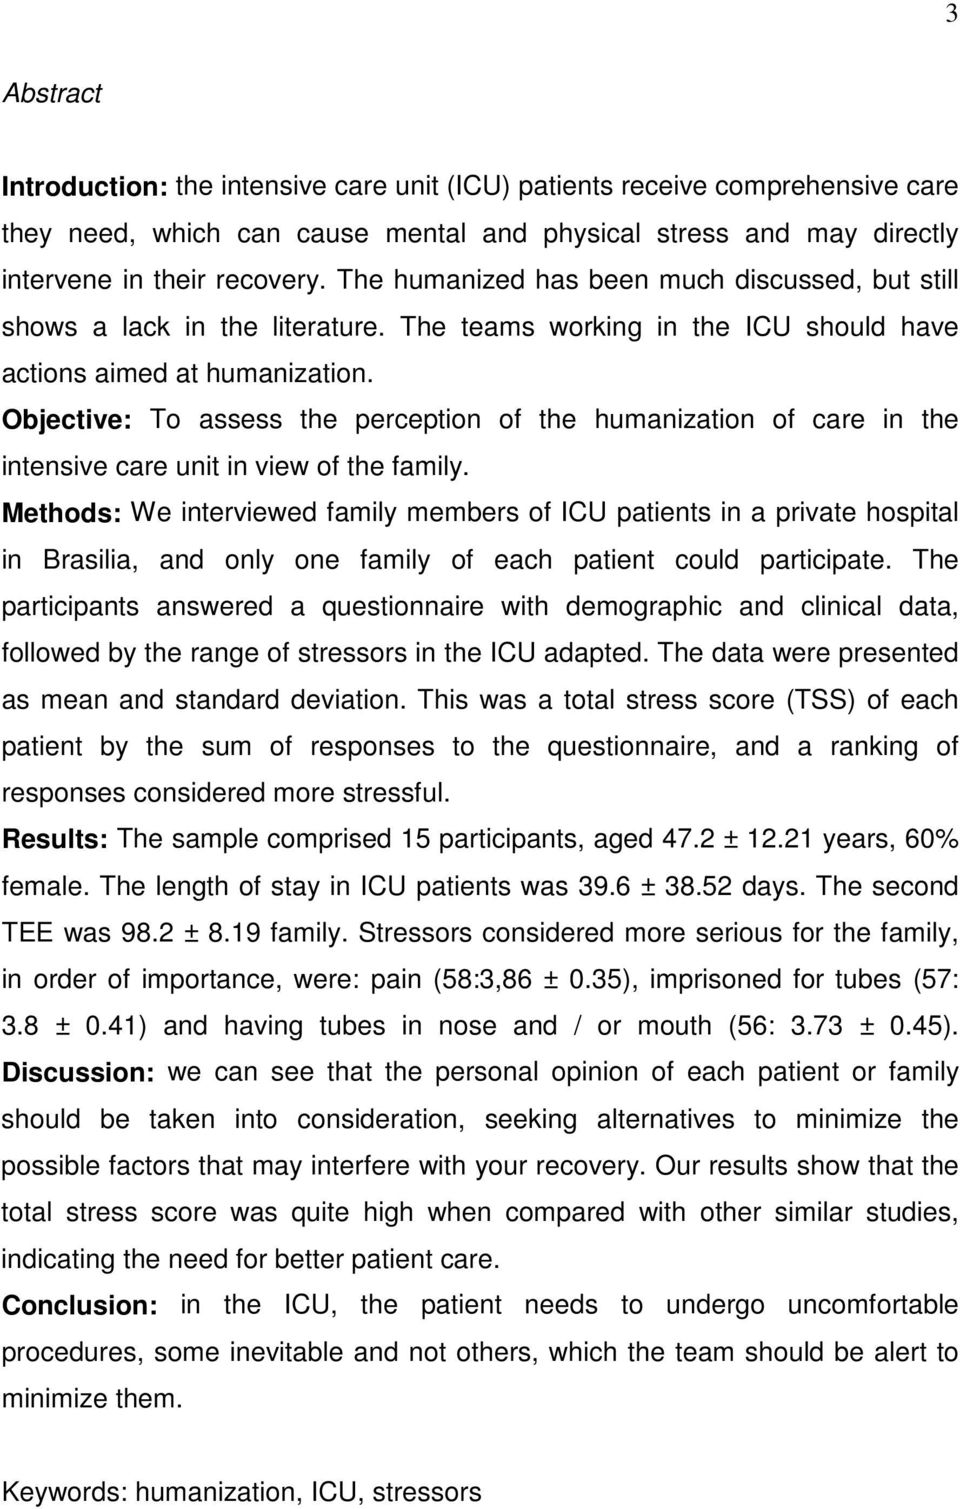 Objective: To assess the perception of the humanization of care in the intensive care unit in view of the family.